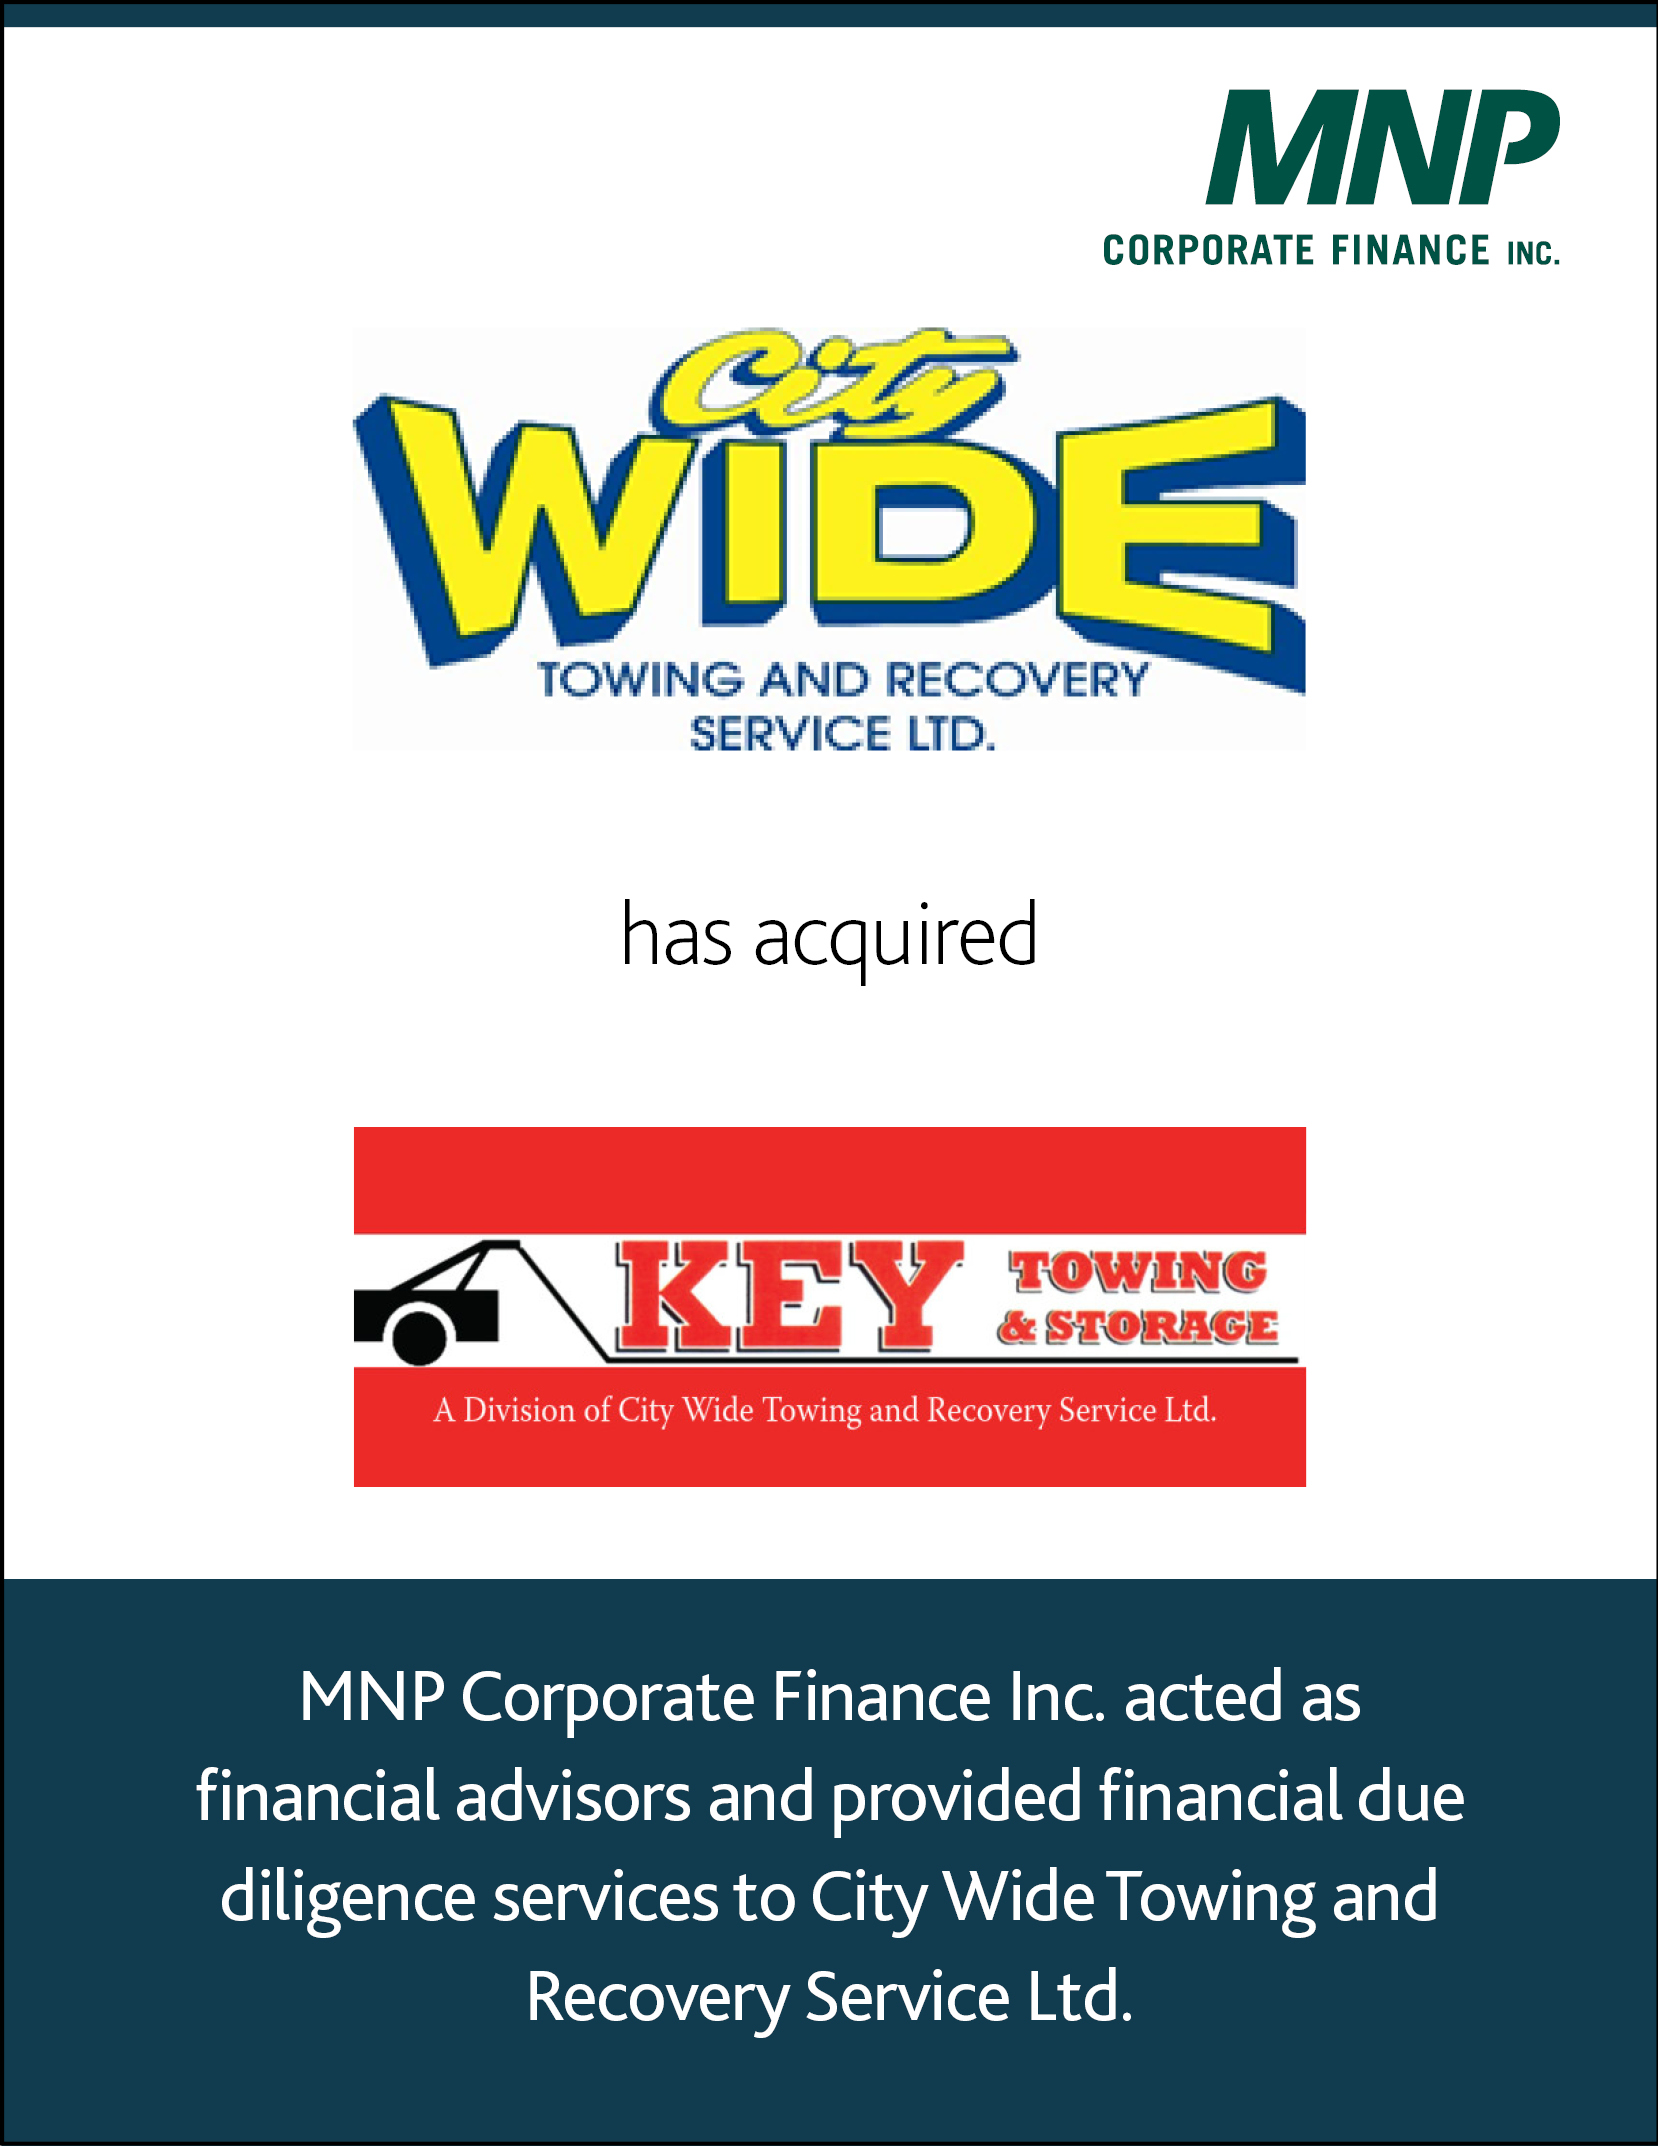 City Wide Towing and Recovery Service Ltd. has acquired Key Towing & Storage (Alberta) Ltd.